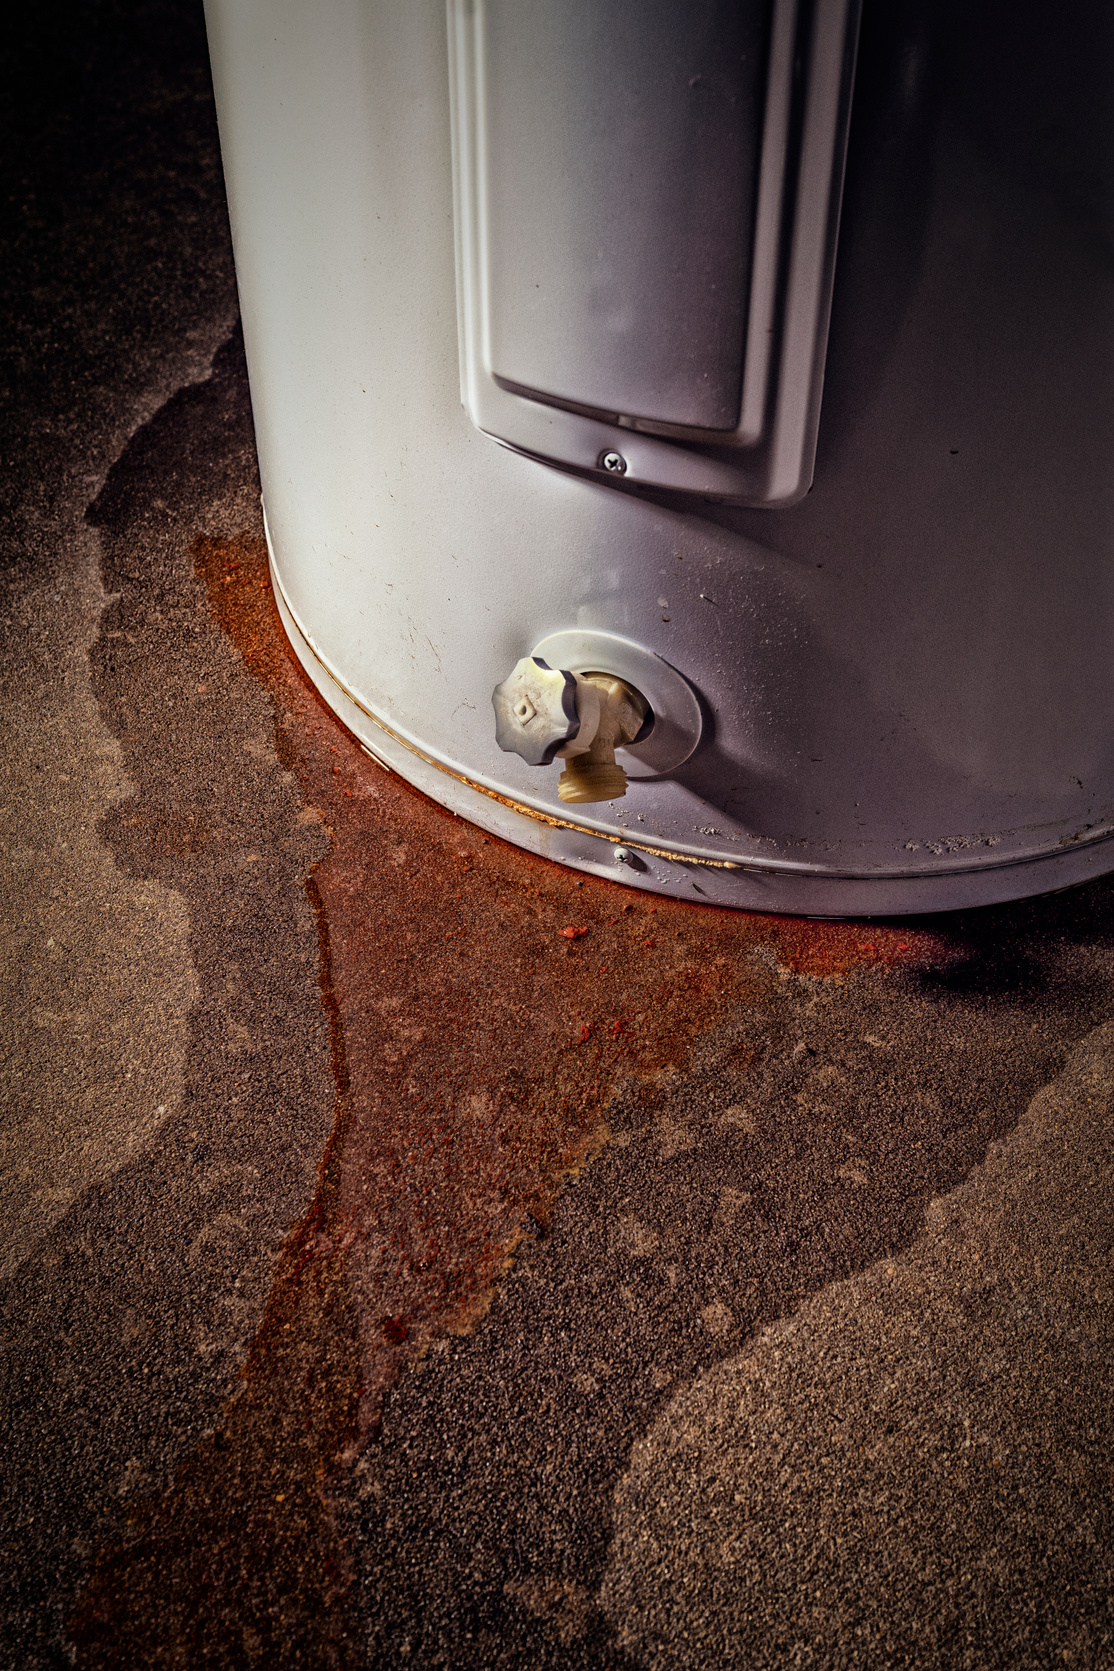 A domestic water heater leaking with signs of rust and iron in the water